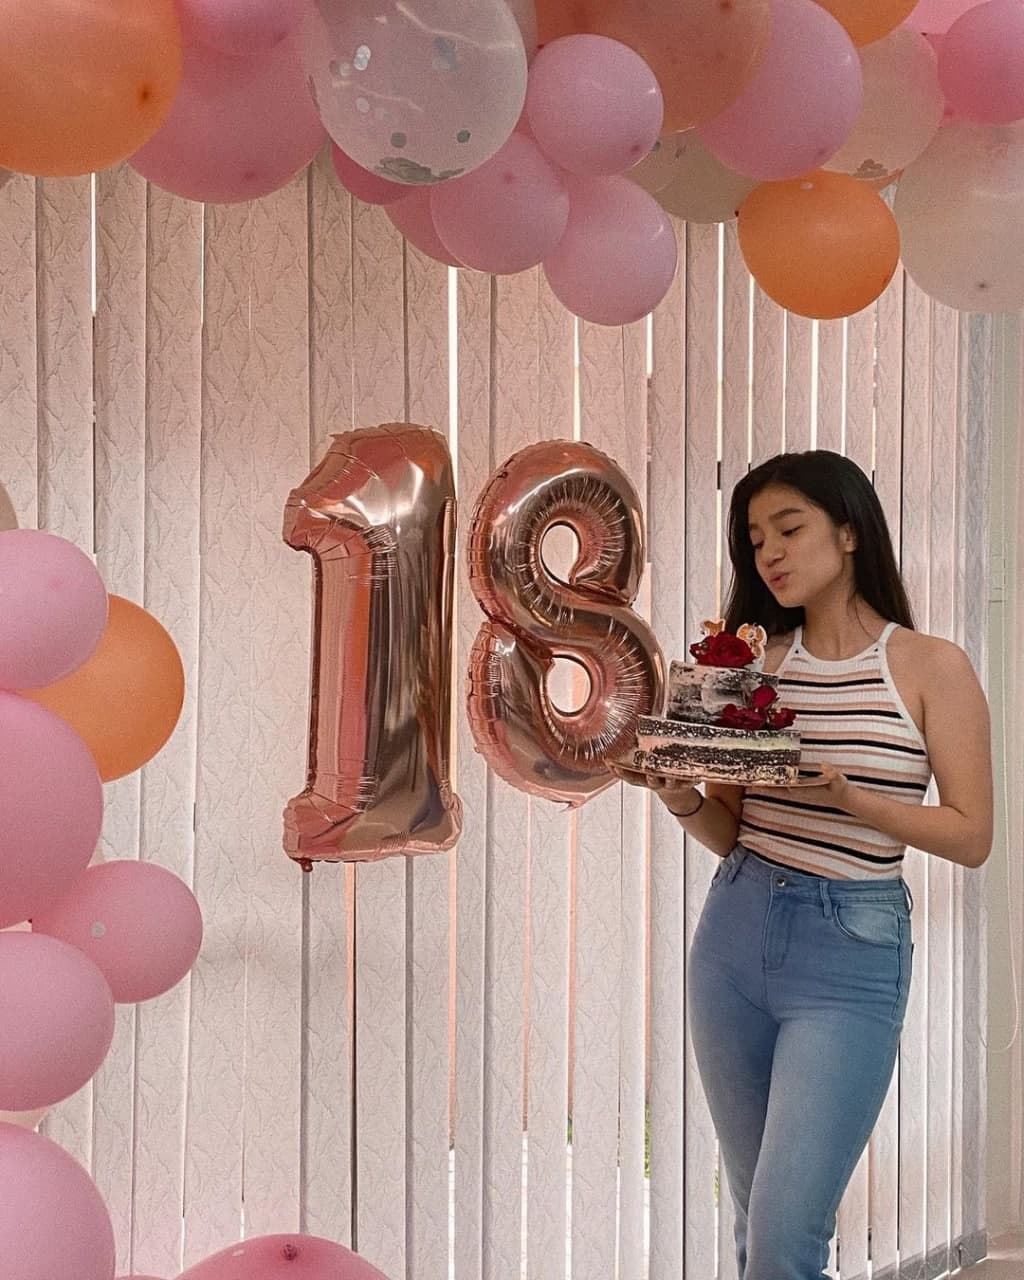 Belle Mariano celebrating her 18th birthday